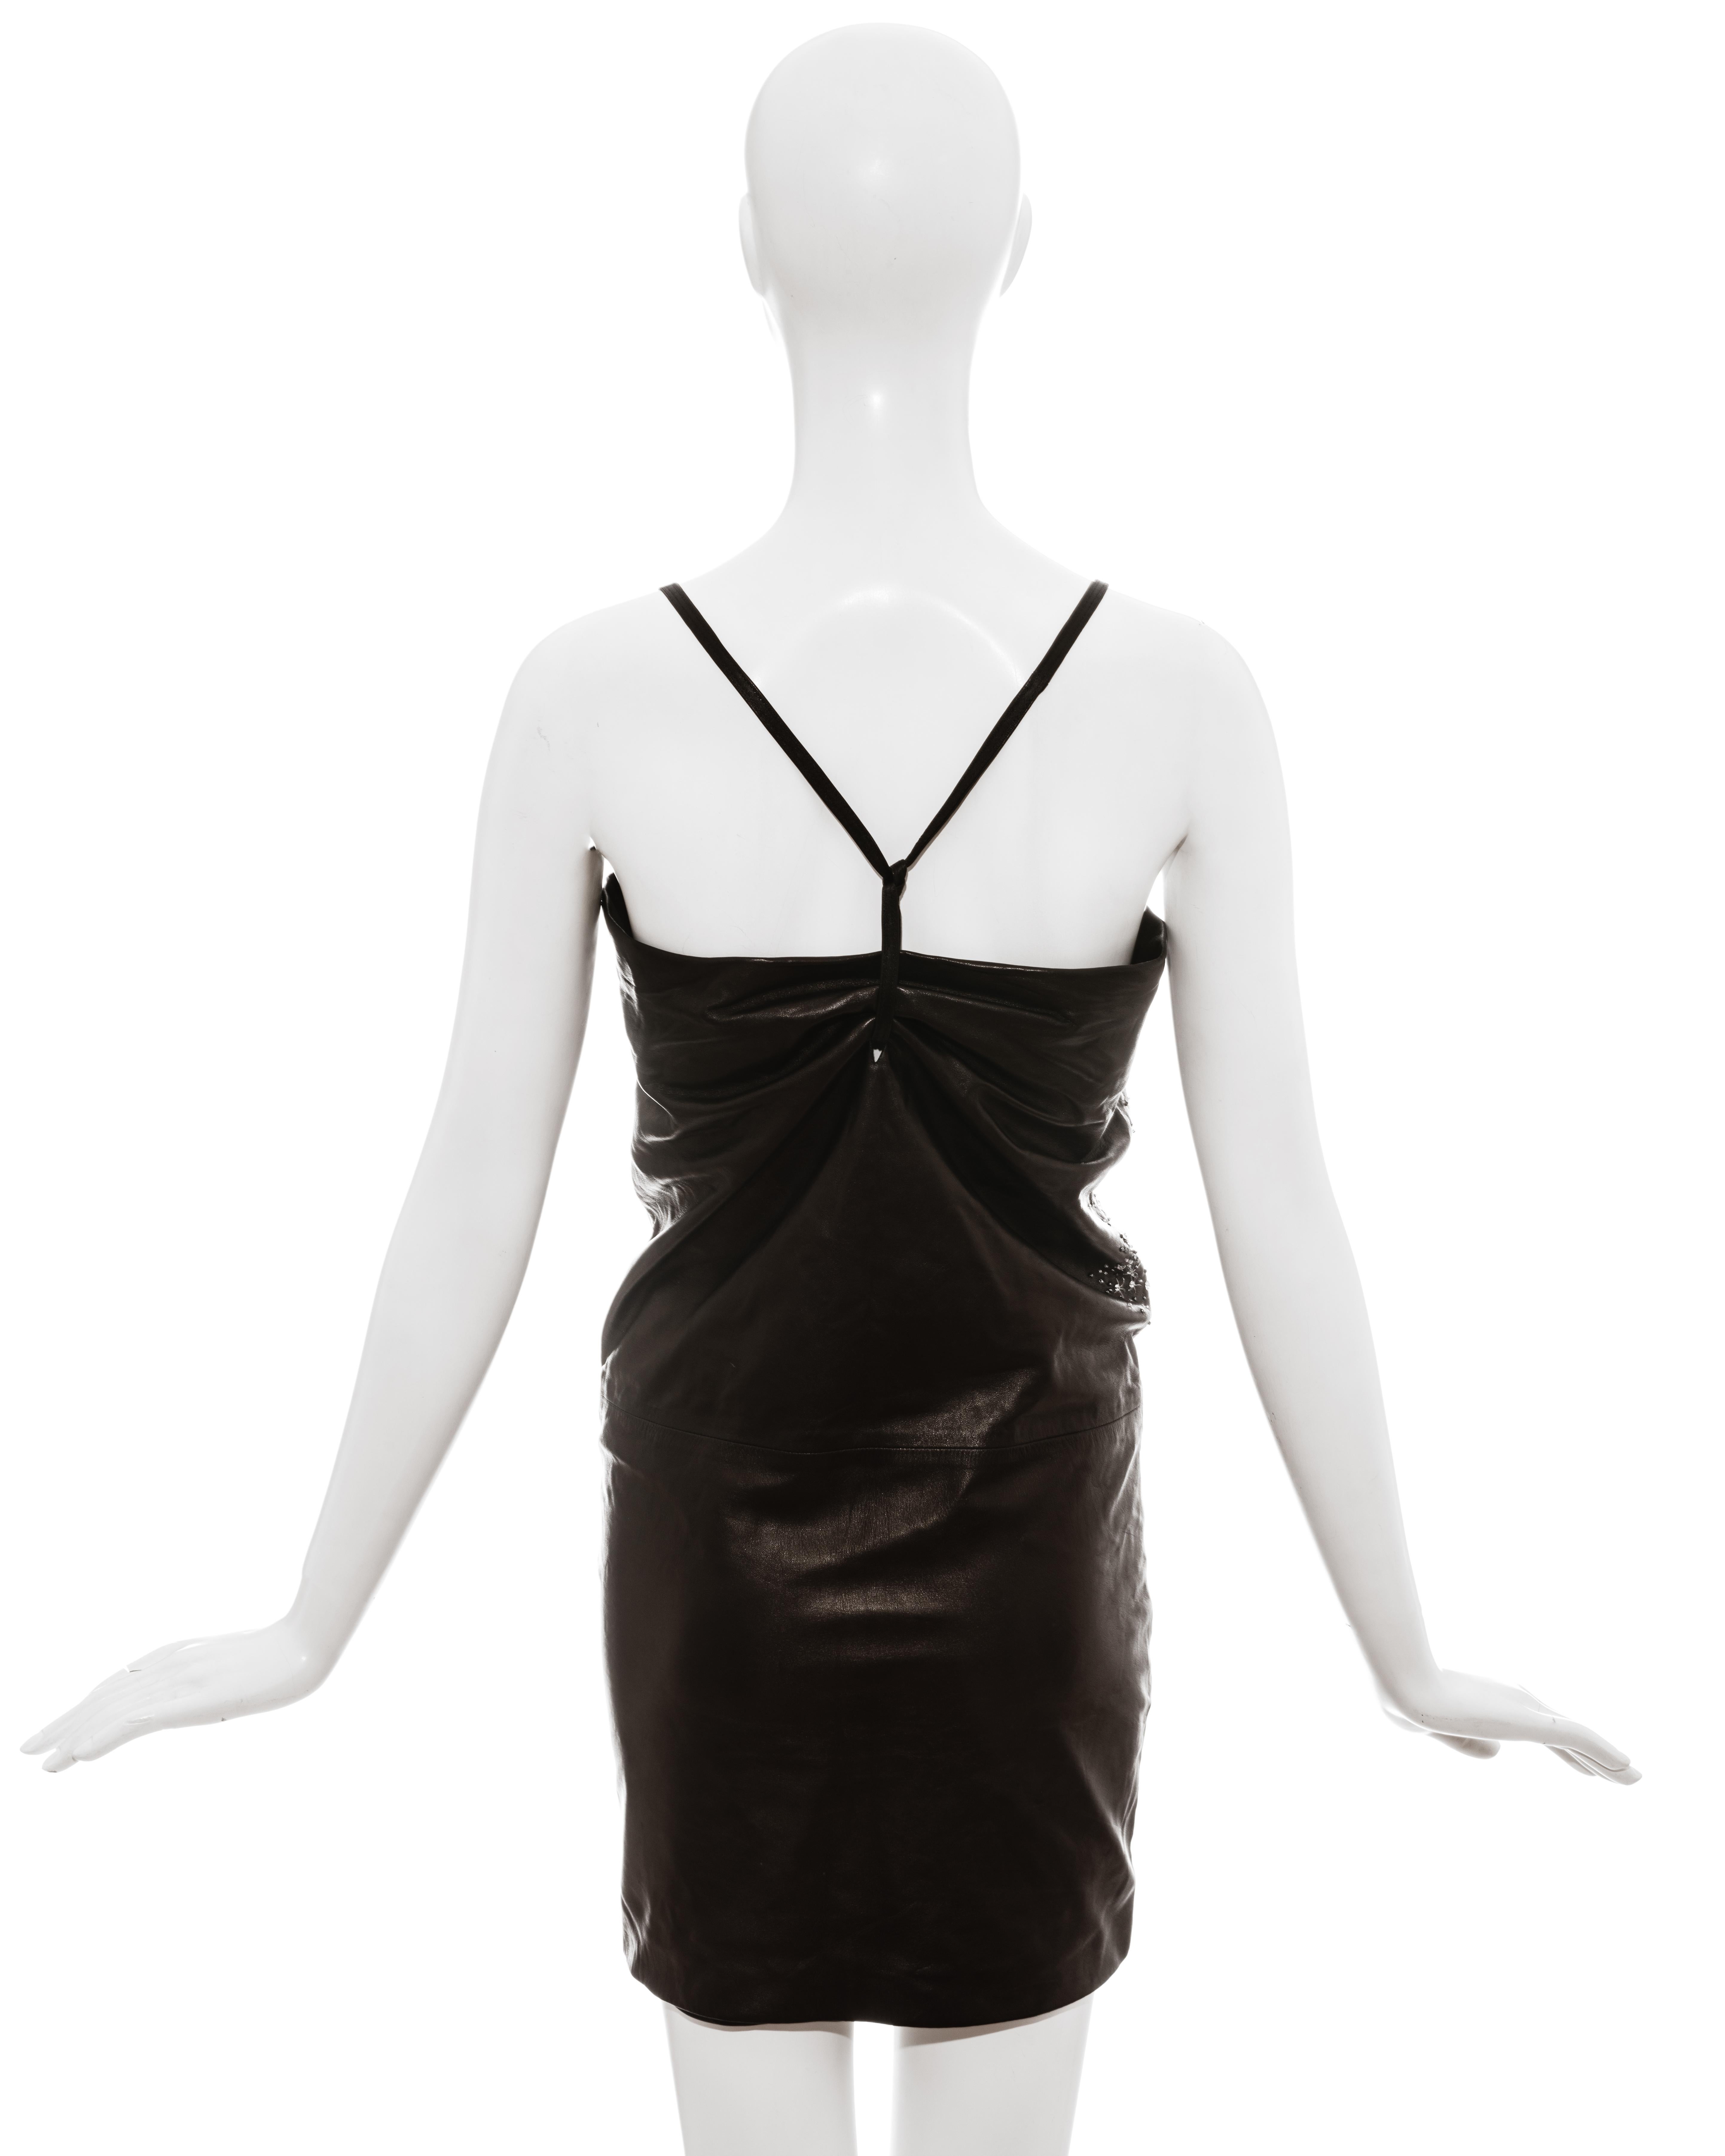 Women's Gianni Versace black leather embellished evening dress, ss 1998